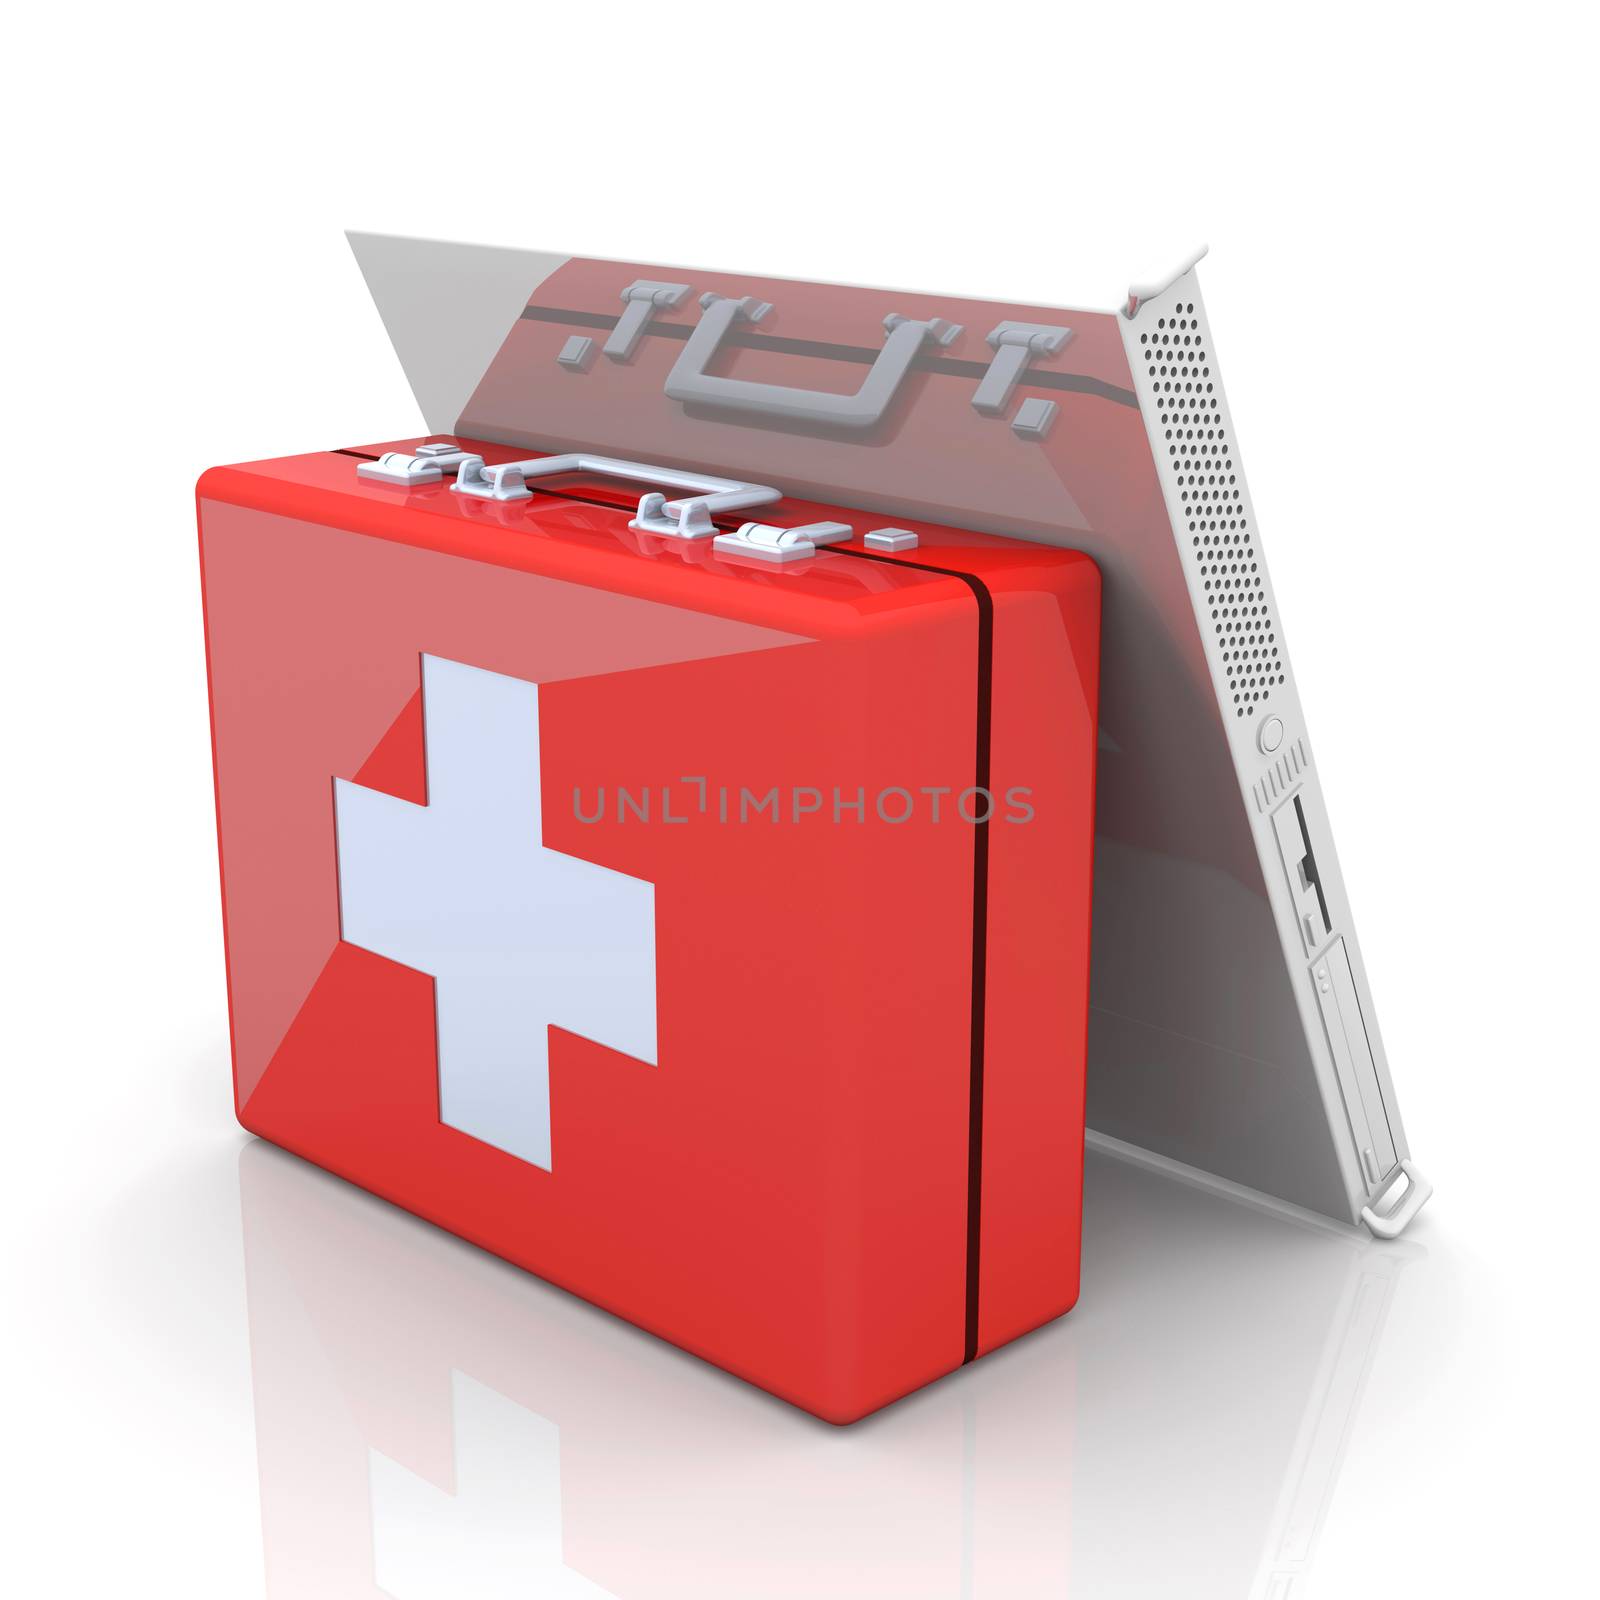 Server first aid		 by Spectral